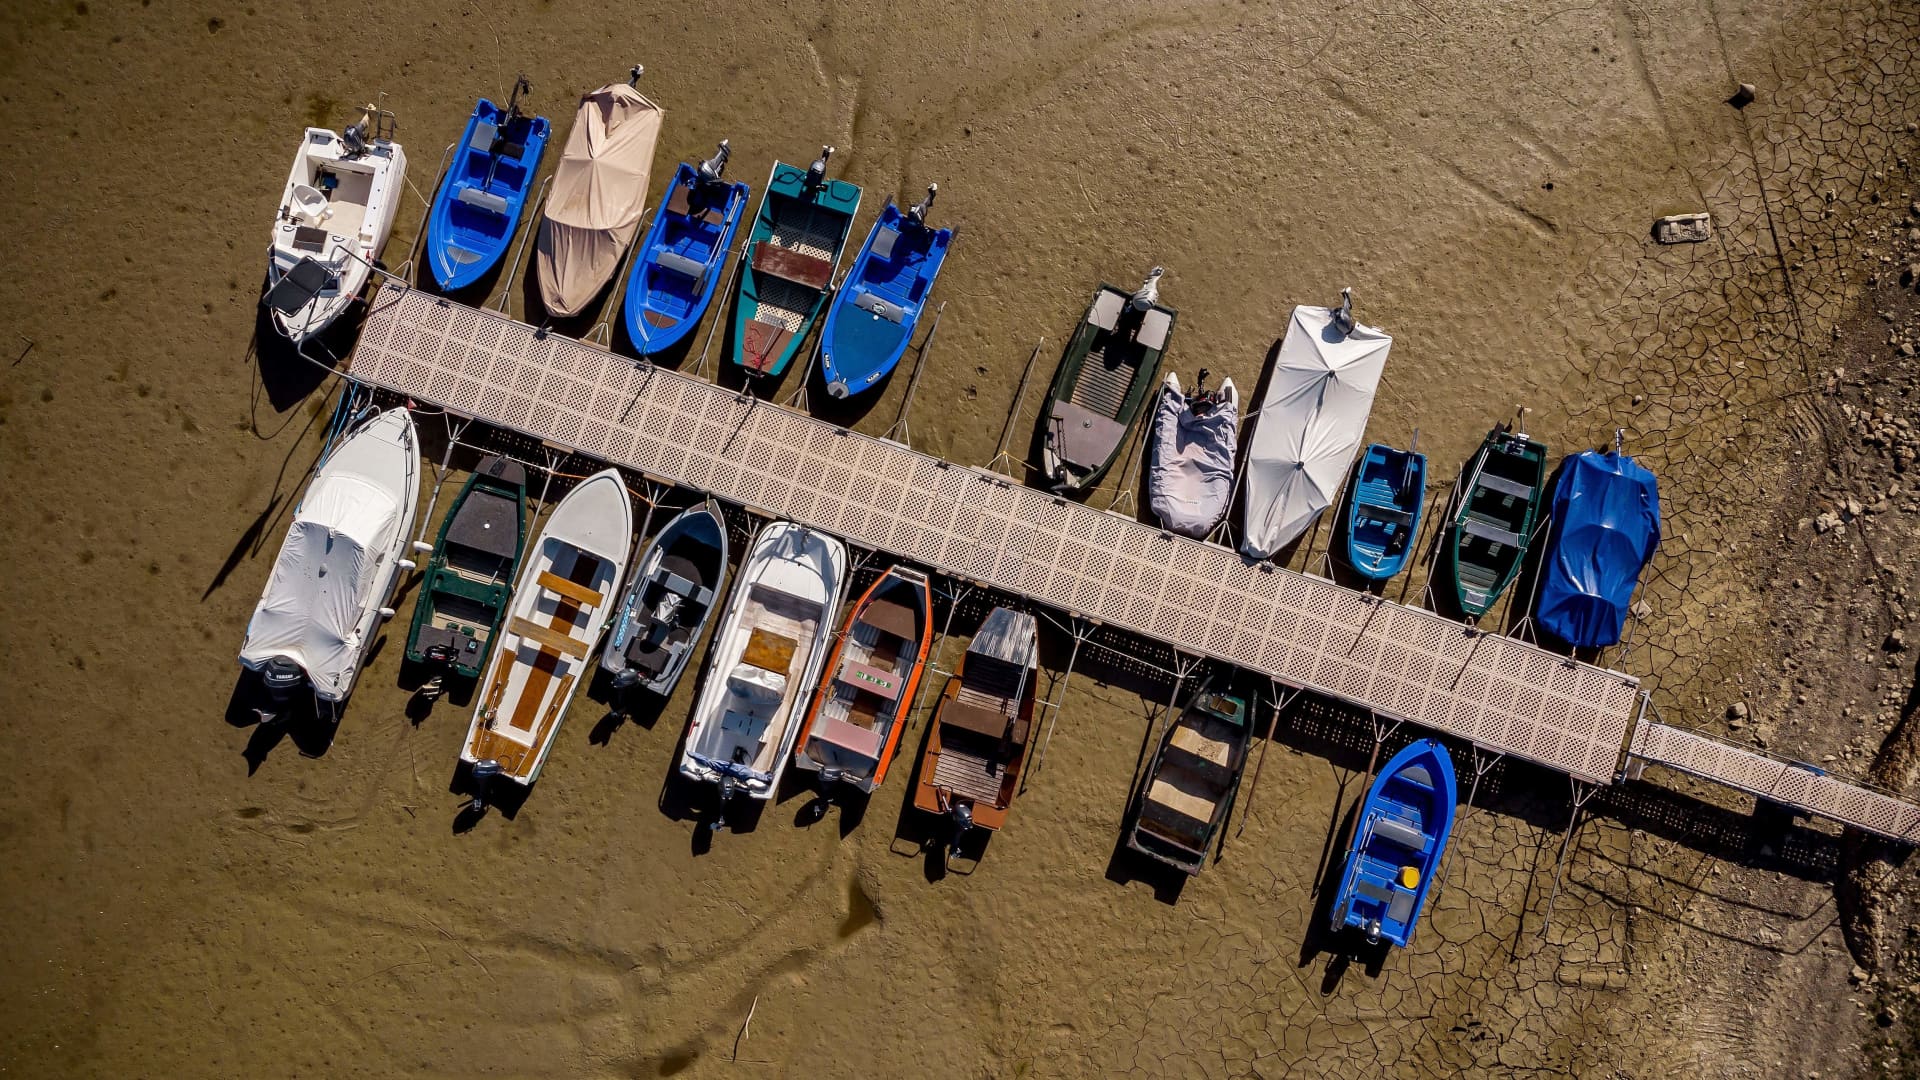 An aerial view shows boats in the dry bed of Brenets Lake (Lac des Brenets), part of the Doubs River, a natural border between eastern France and western Switzerland, in Les Brenets on July 18, 2022. 